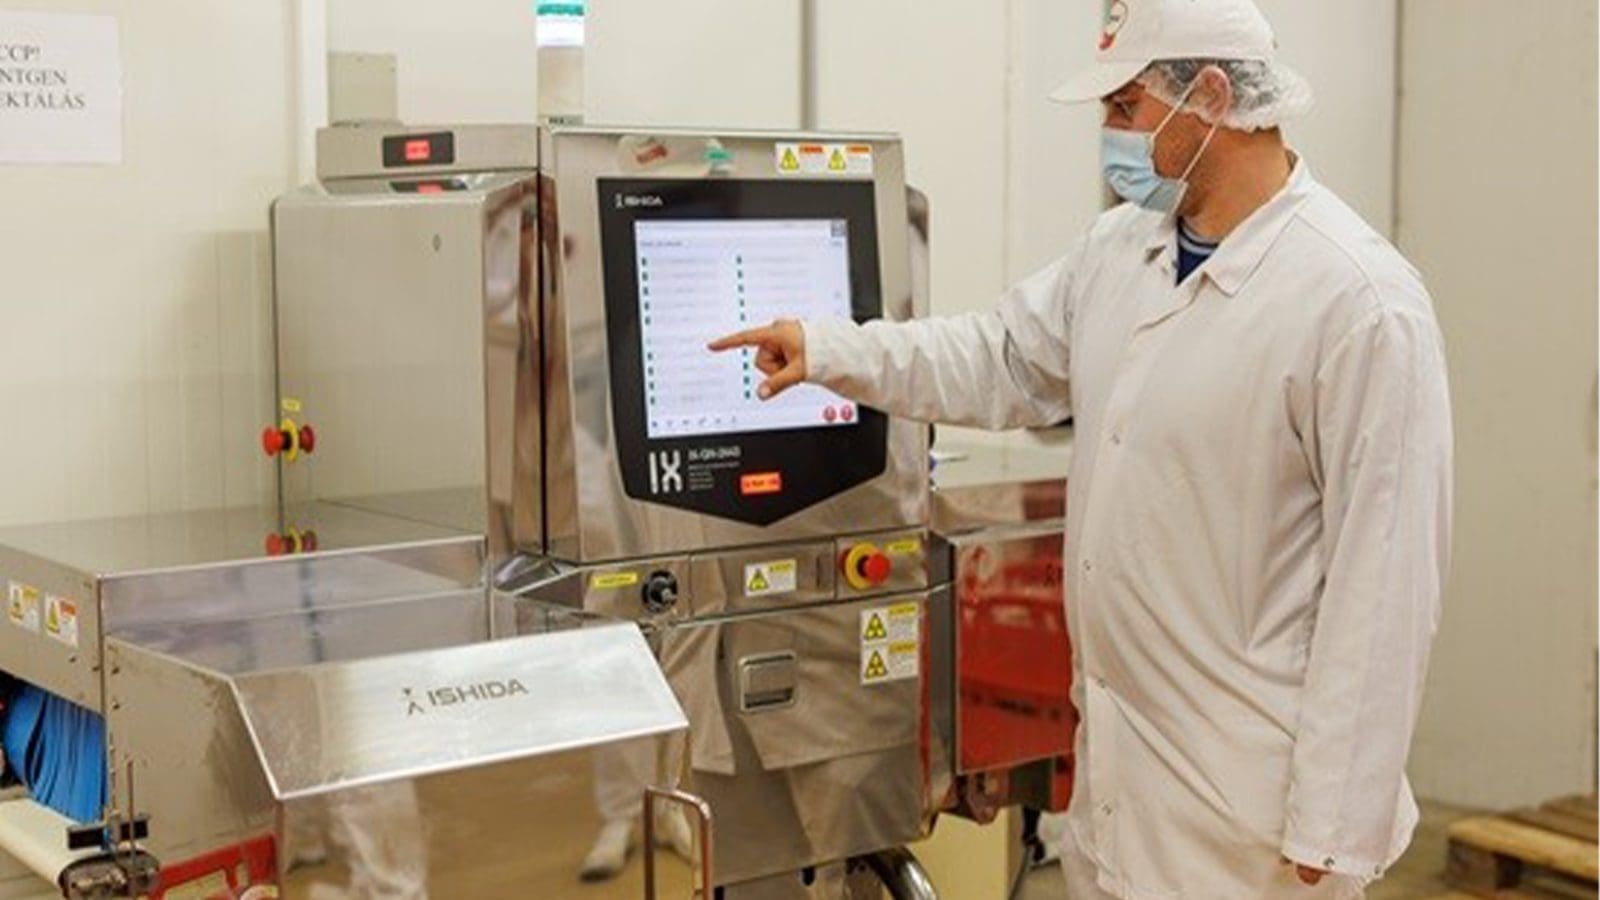 Hungary’s iconic meat brand Pápai Hús embraces cutting-edge X-ray technology to ensure quality, safety